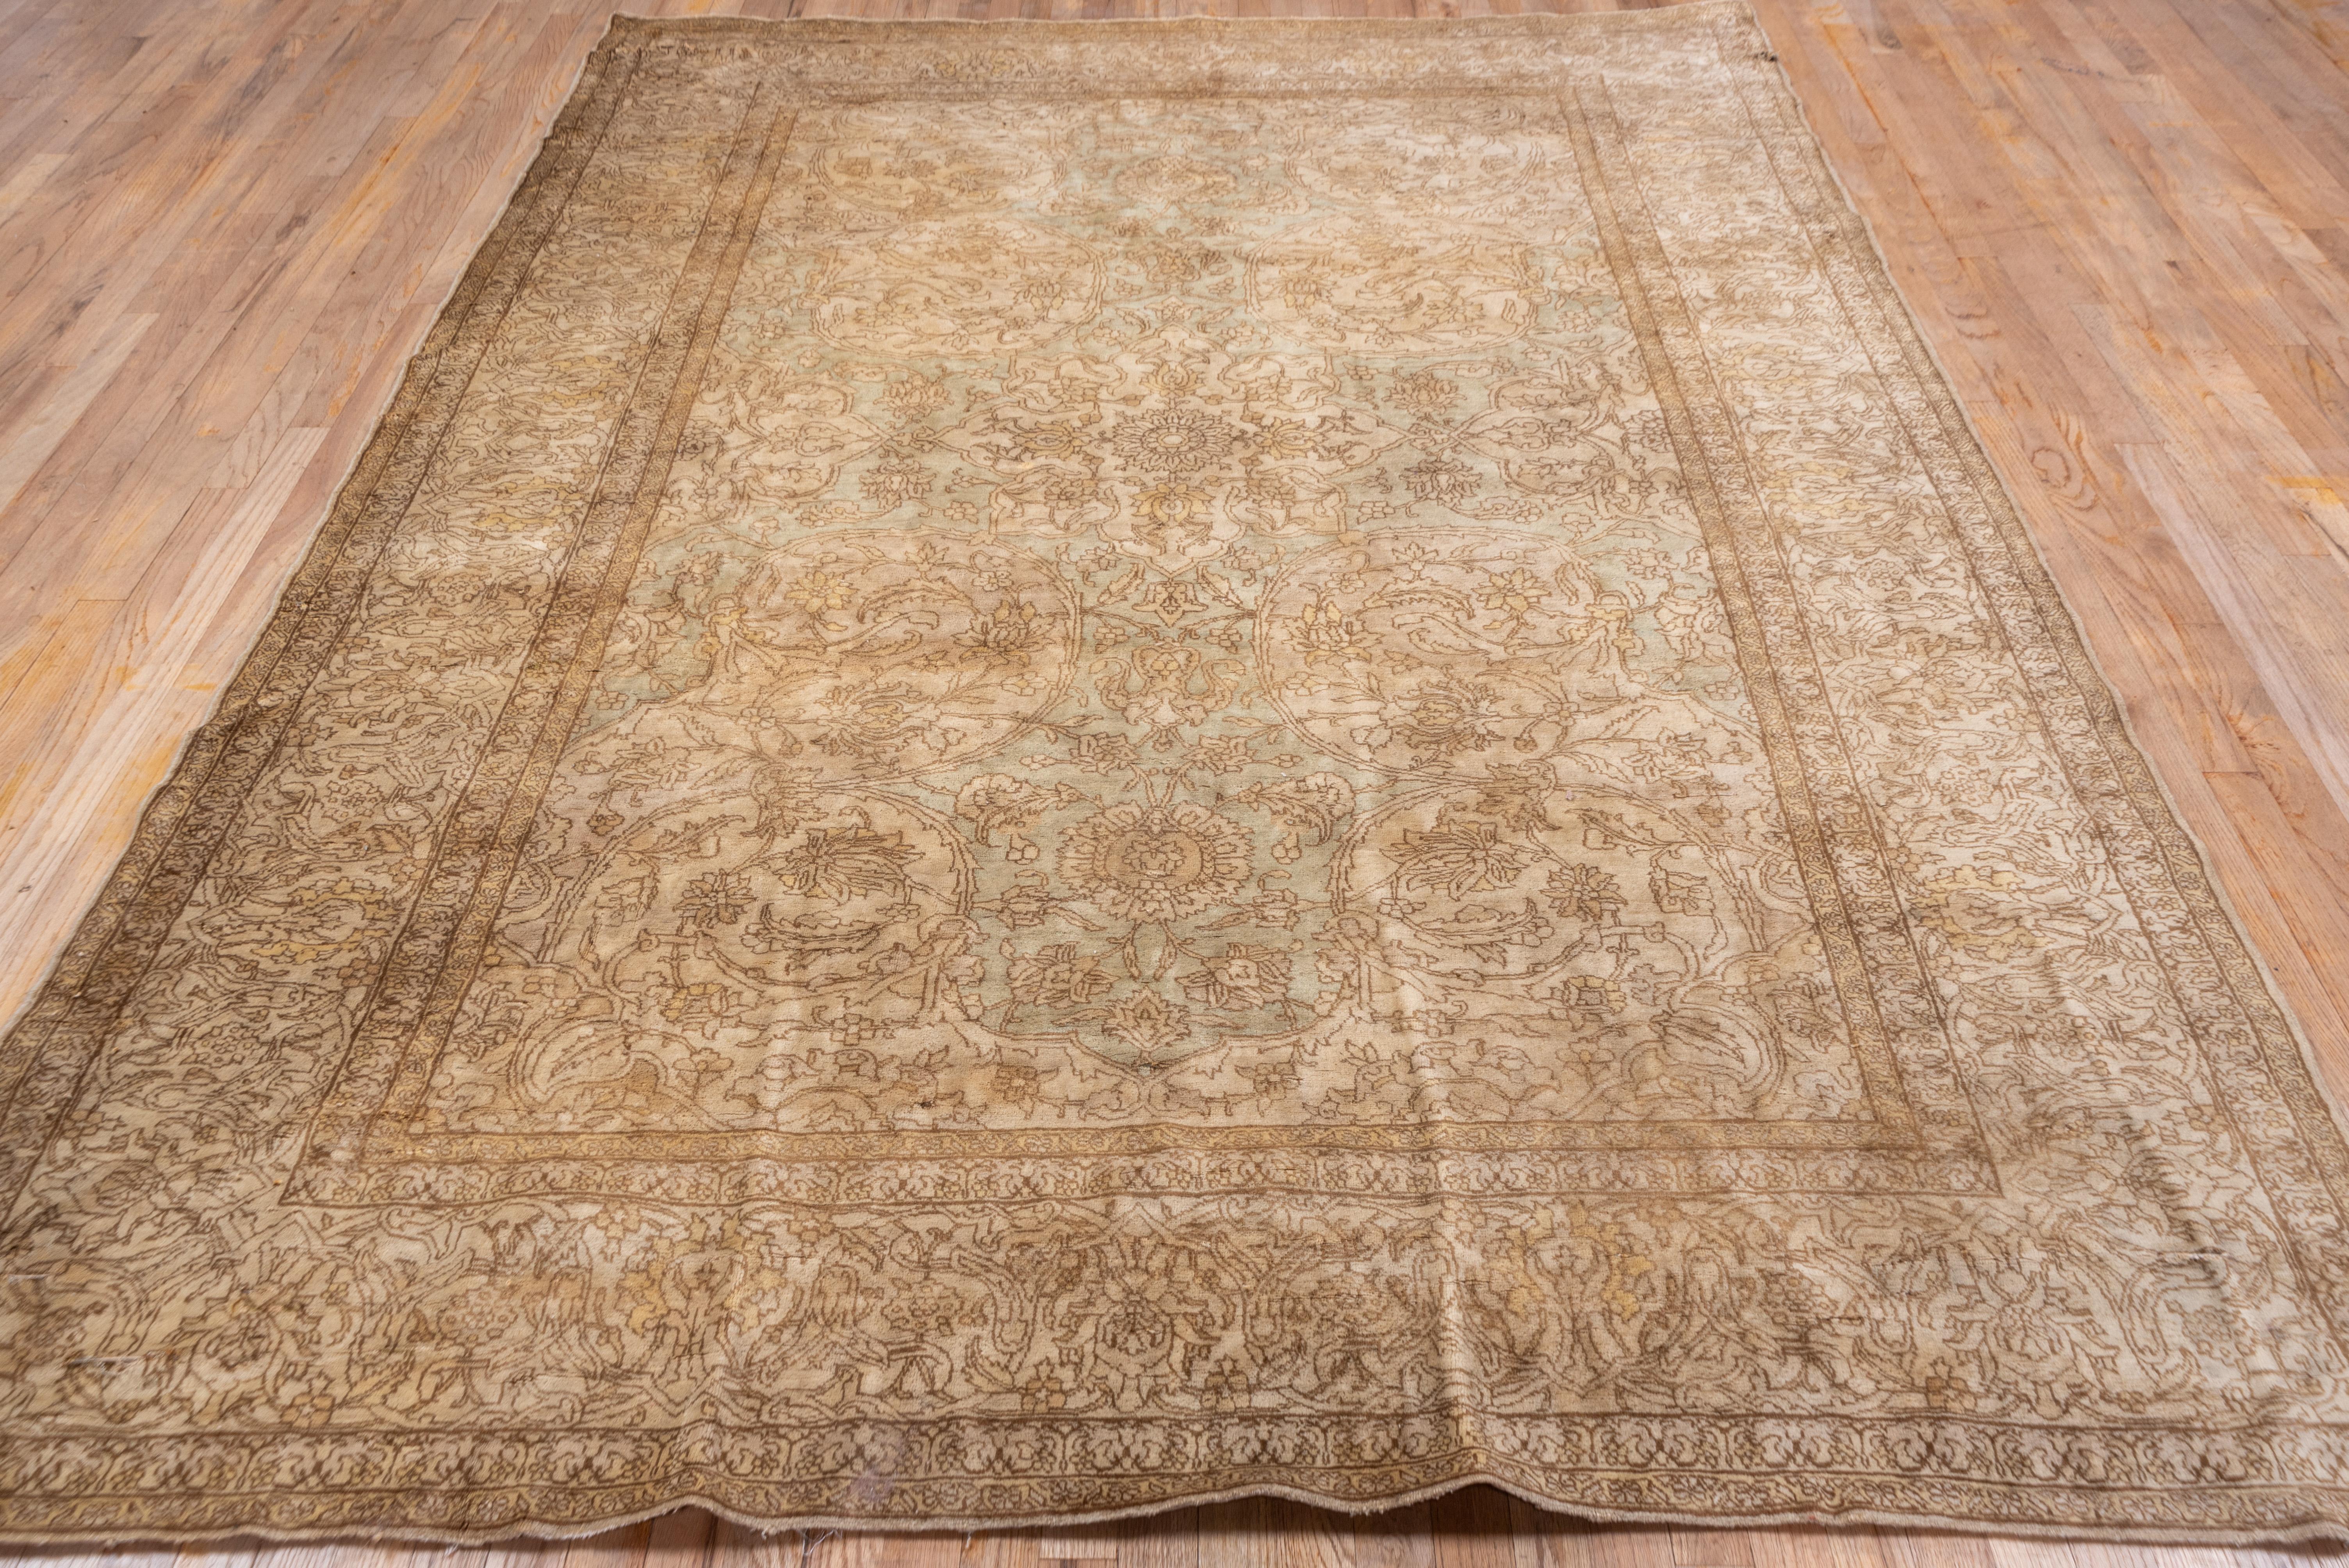 Hand-Knotted Finely Woven Tone on Tone Antique Persian Tabriz Rug, circa 1920s For Sale